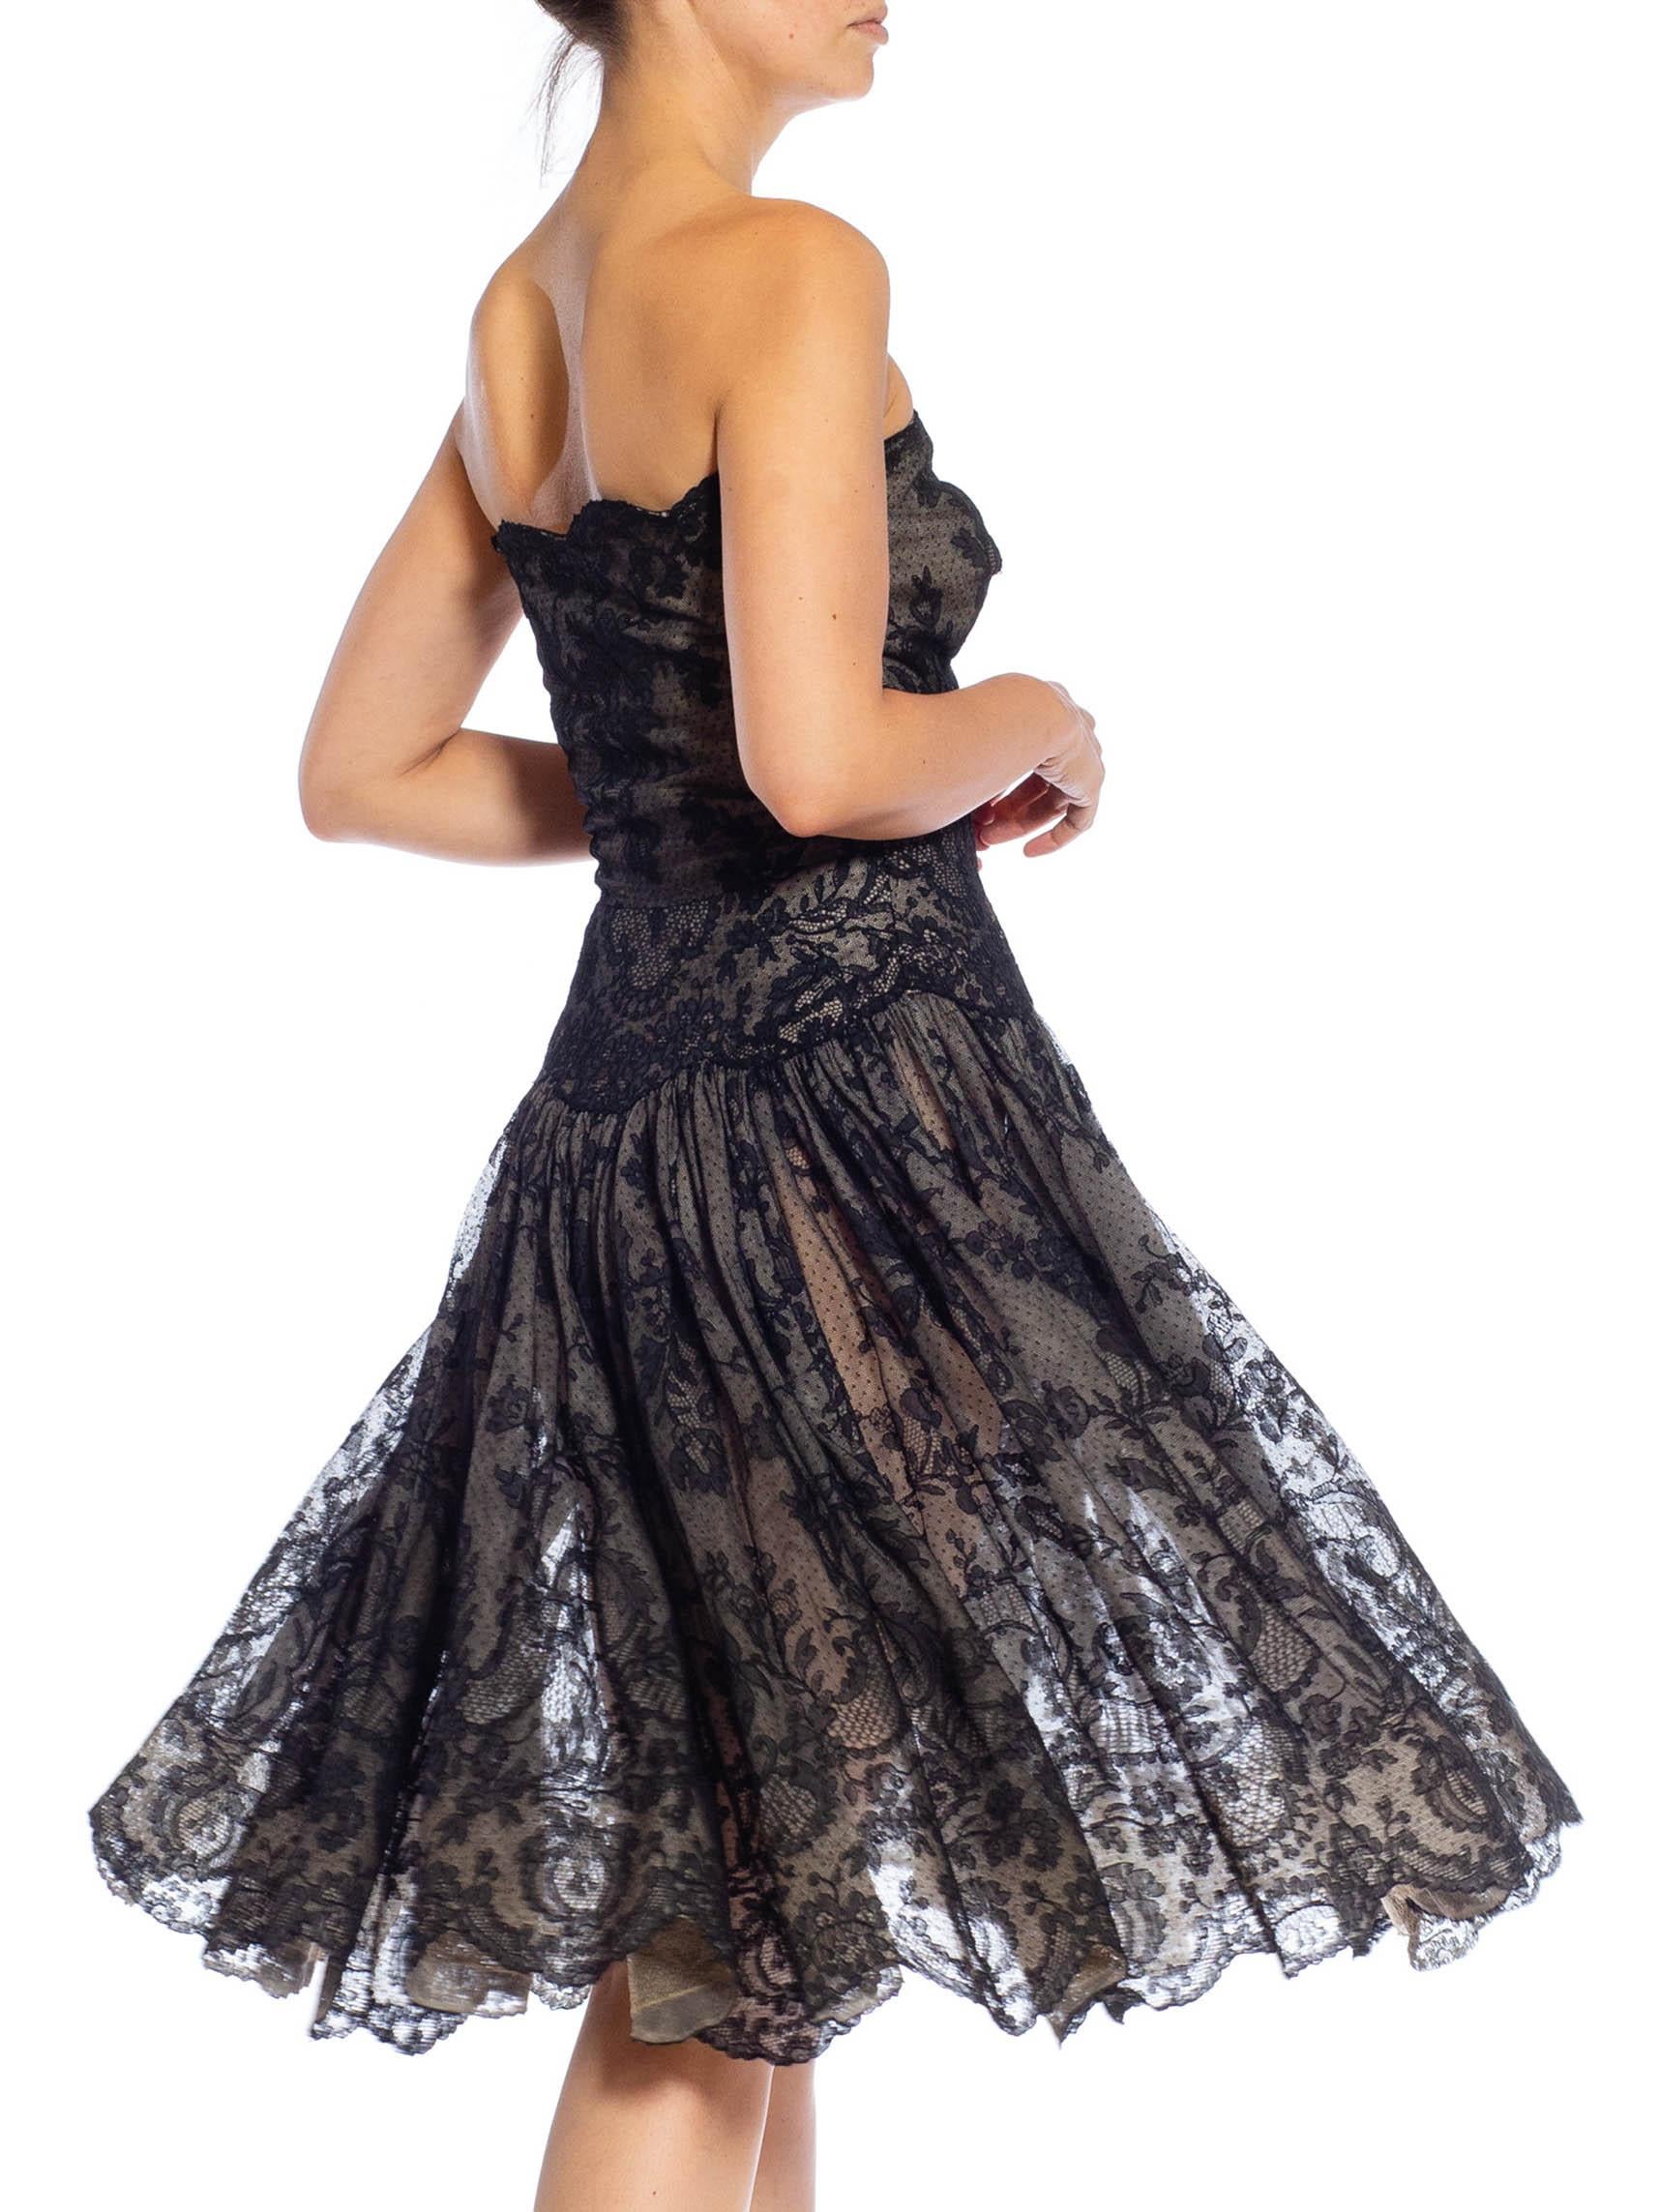 1950S Black Floral Lace Strapless Fit & Flare Cocktail Dress From Paris For Sale 4